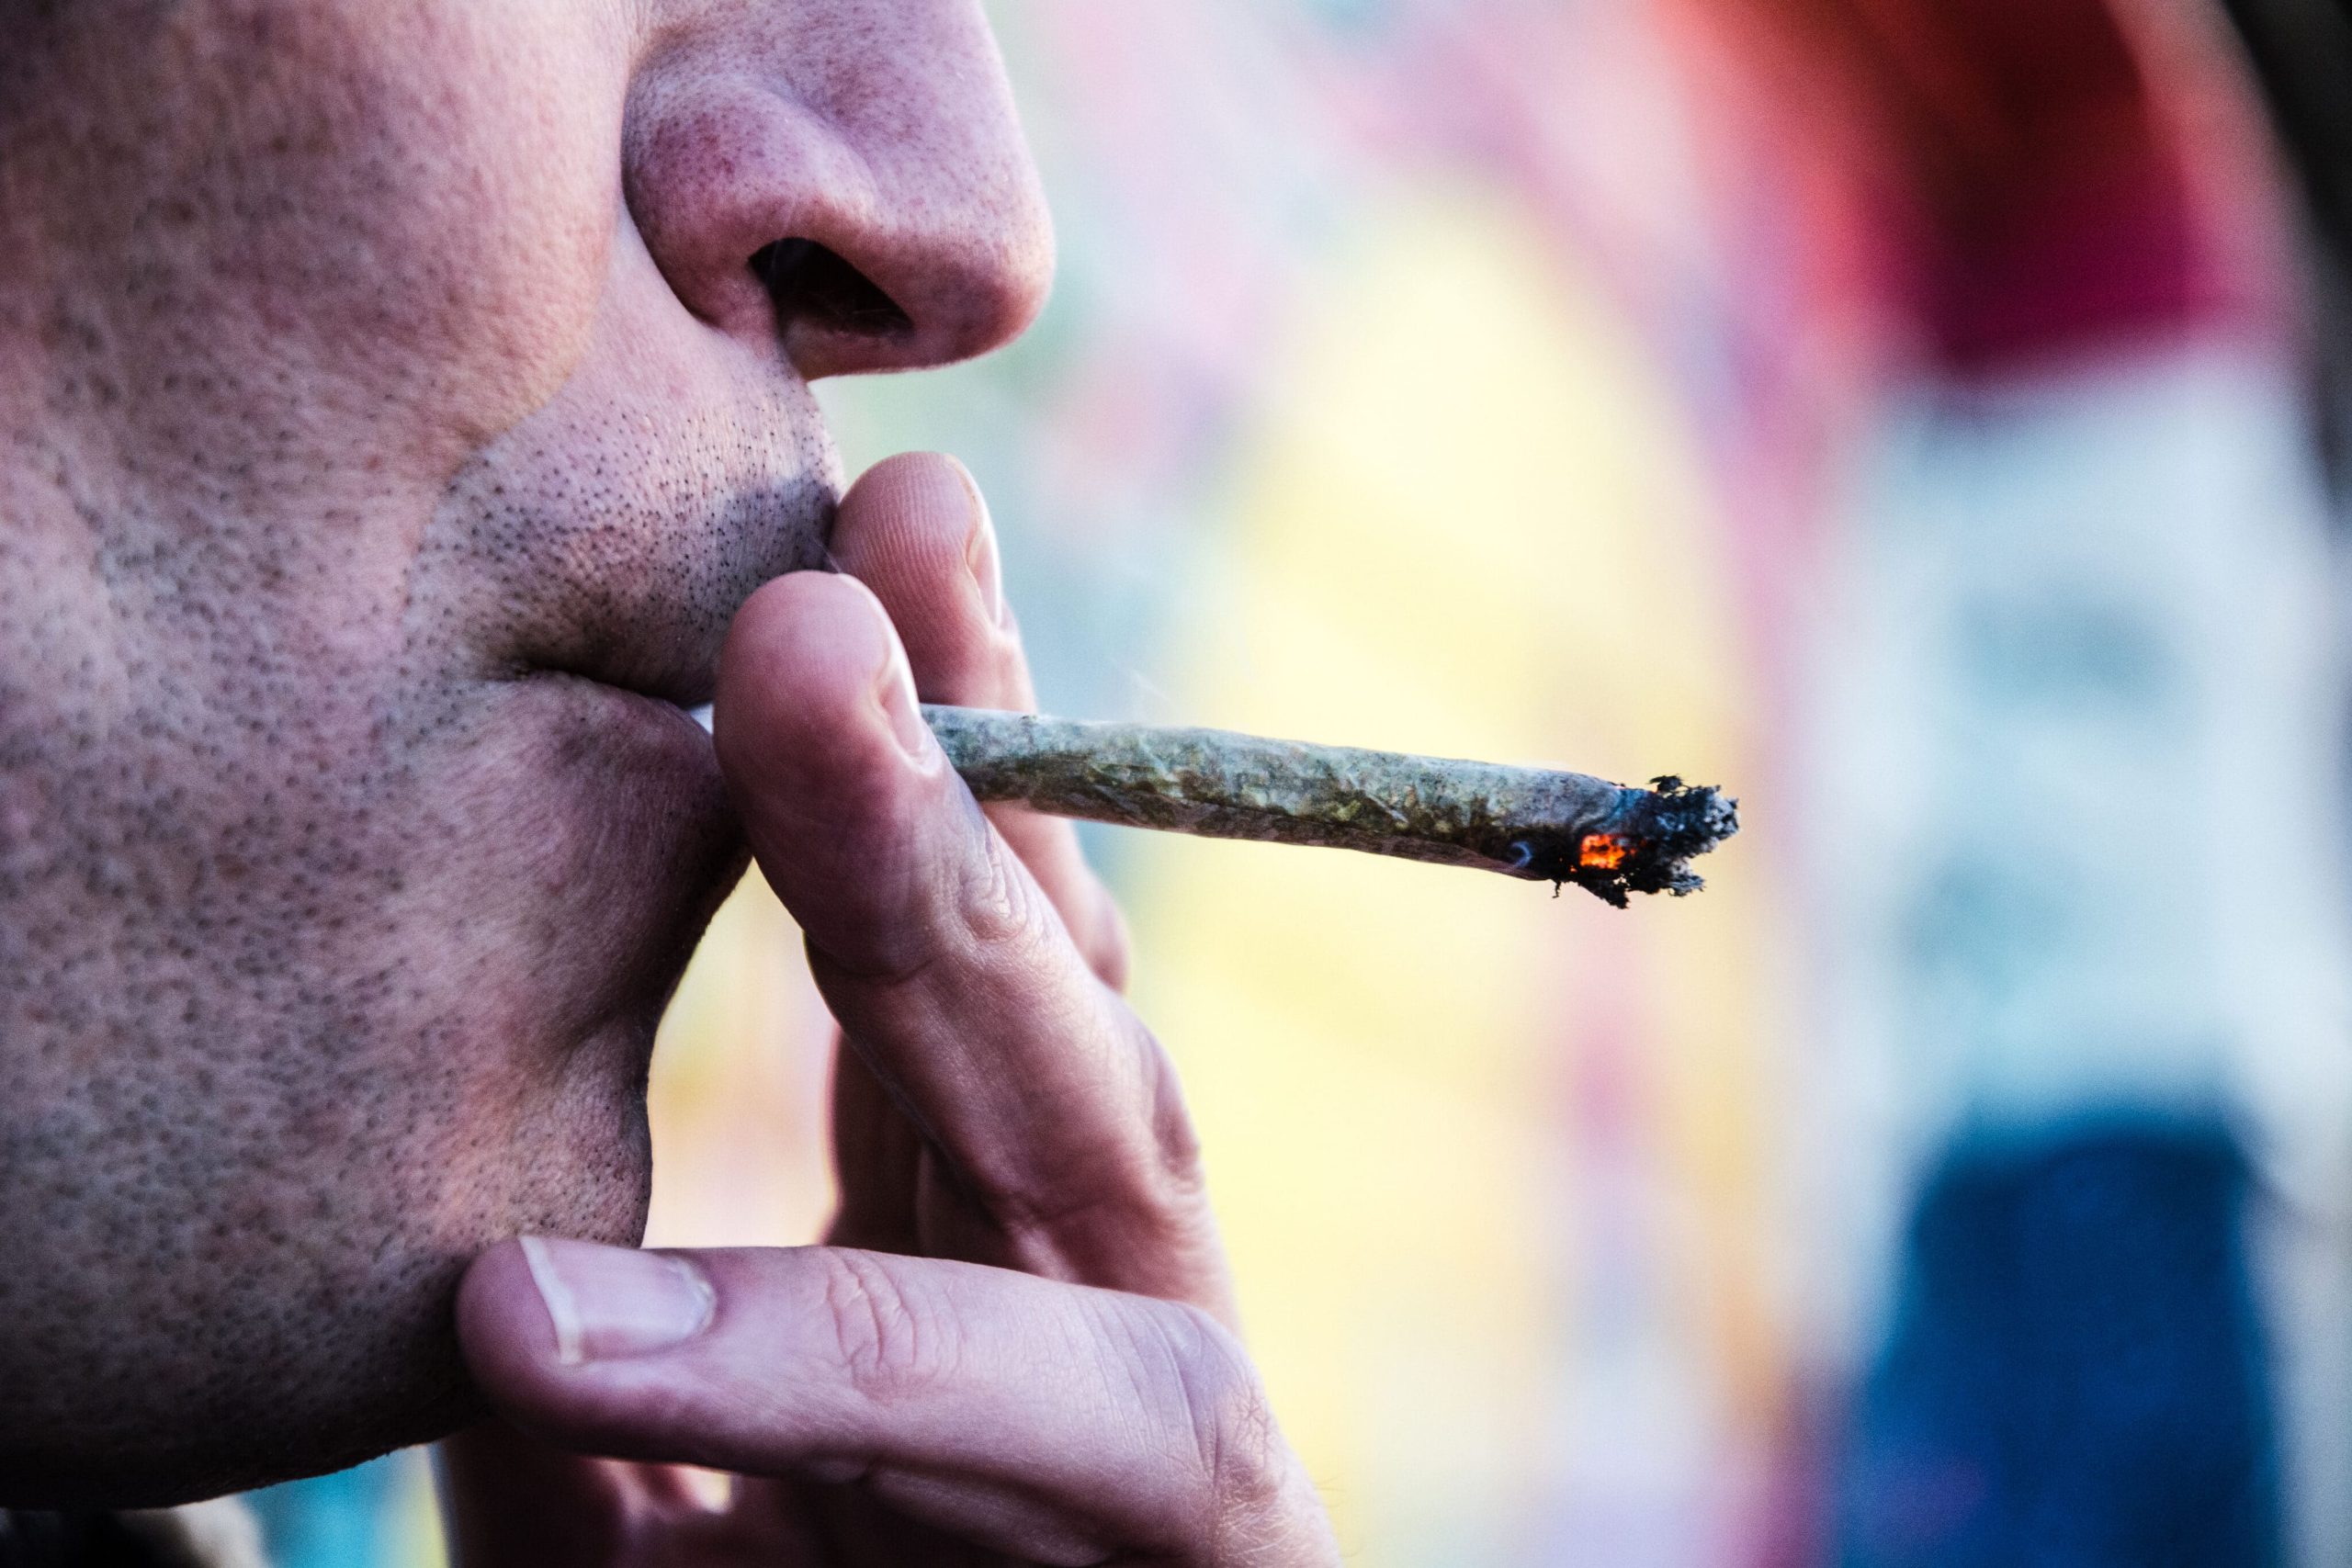 Study: German Patients Have ‘Greater Satisfaction’ With MMJ Than Previous Treatments